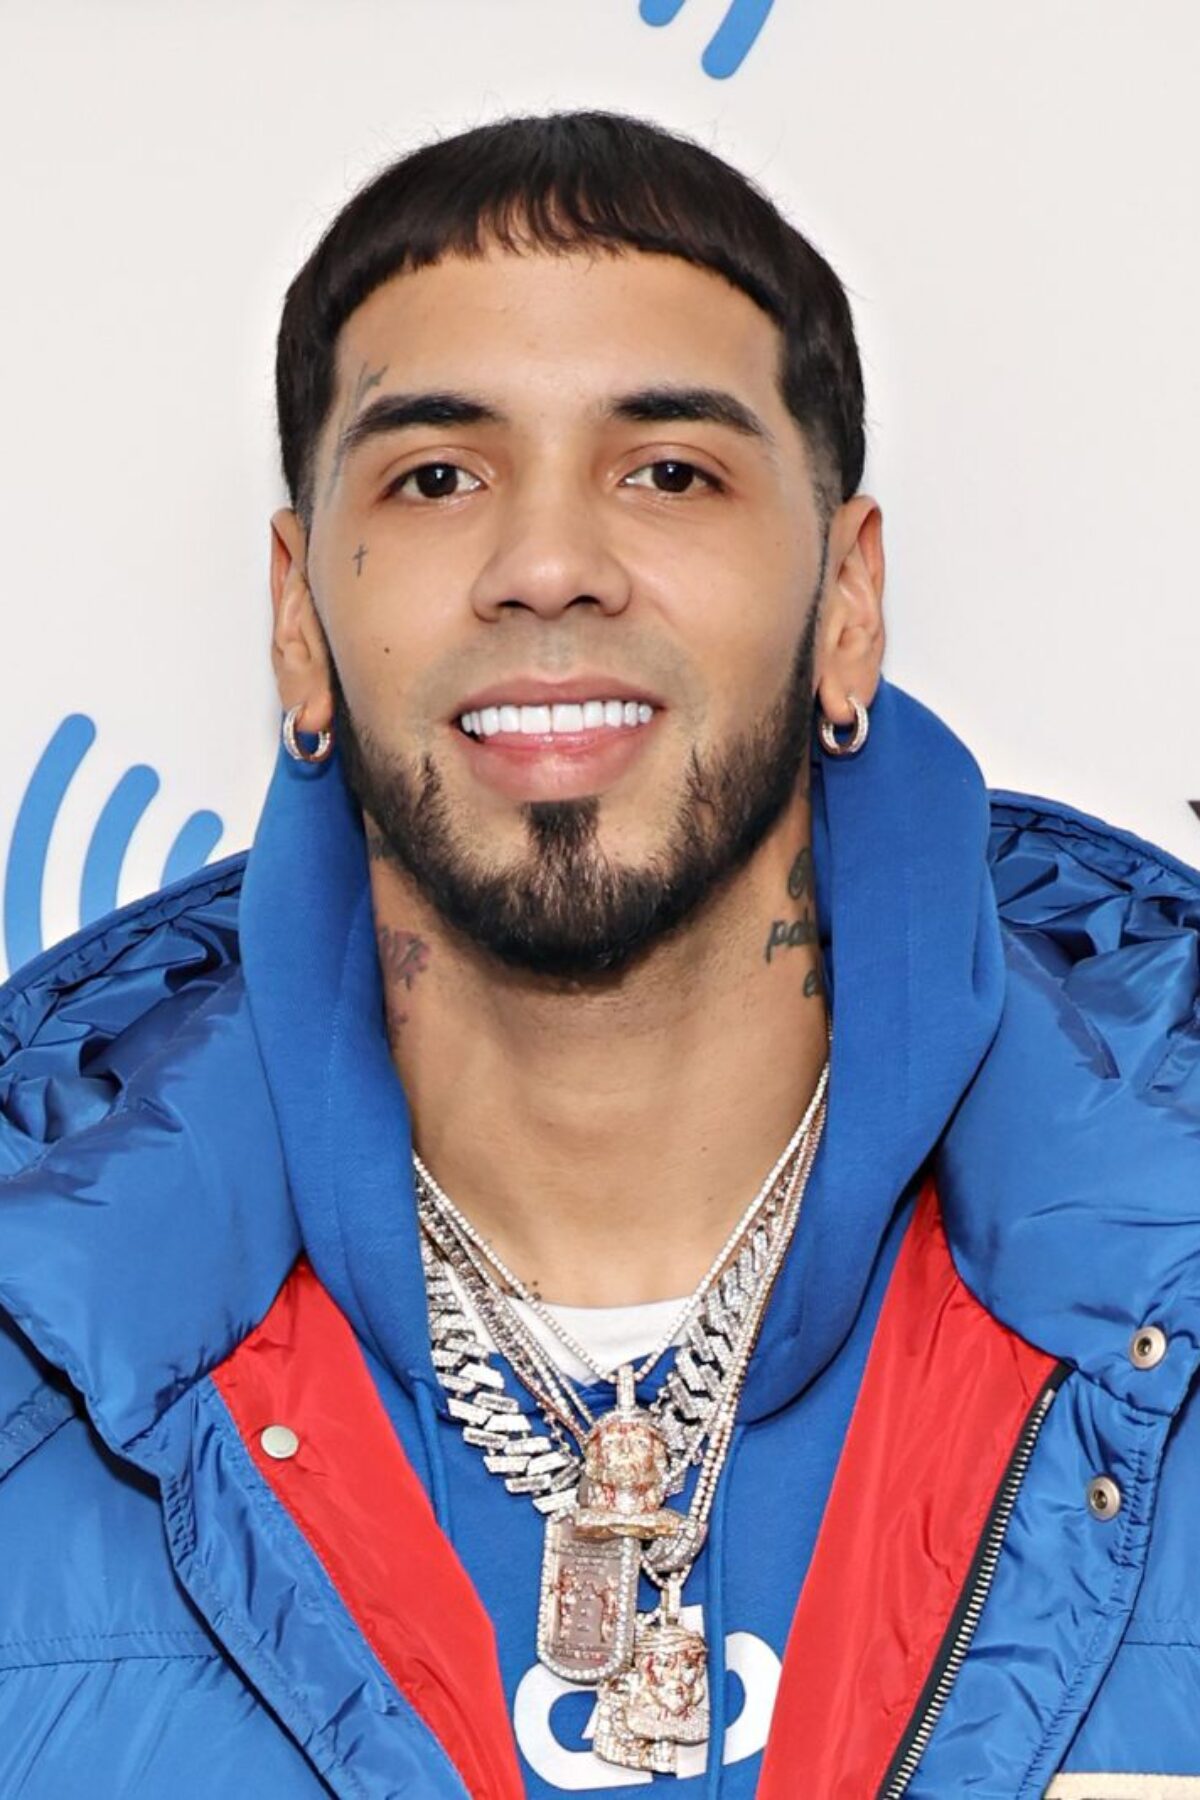 NEW YORK, NEW YORK - JANUARY 18: Anuel AA visits the SiriusXM Studios on January 18, 2023 in New York City. (Photo by Cindy Ord/Getty Images for SiriusXM)